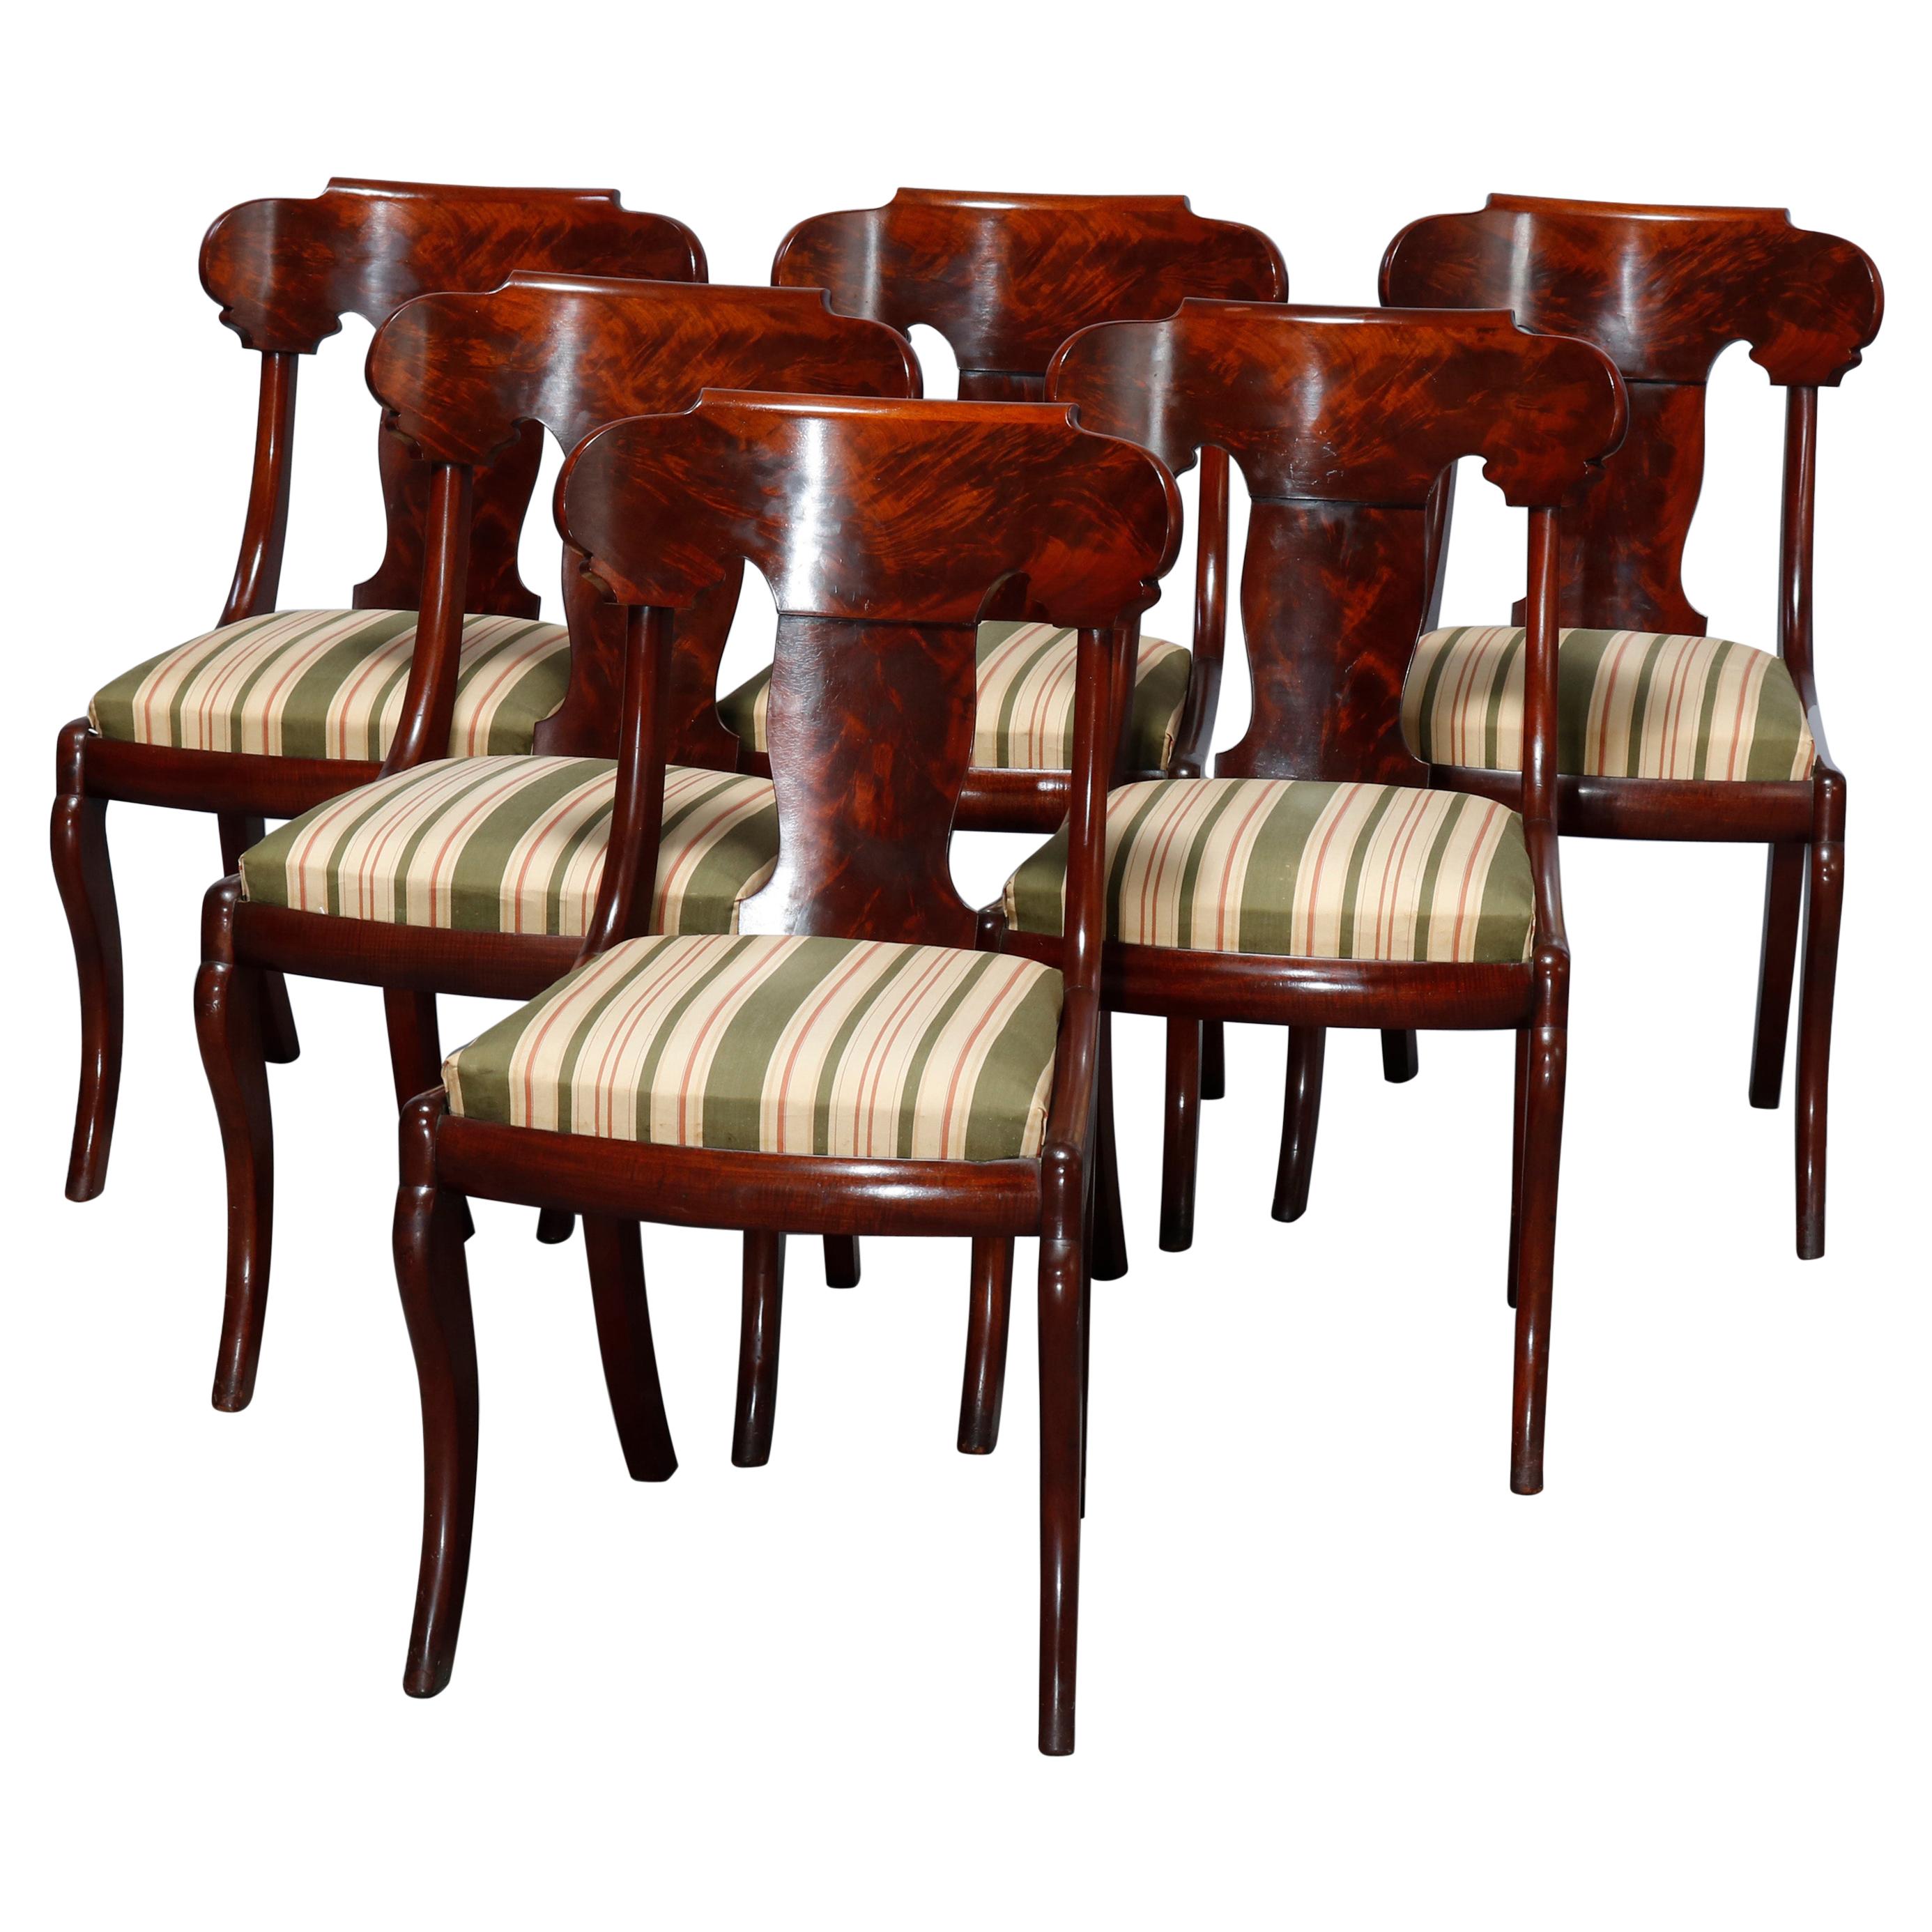 Antique Set of Six Flame Mahogany Gondola Dining Chairs with Saber Legs, 19th C